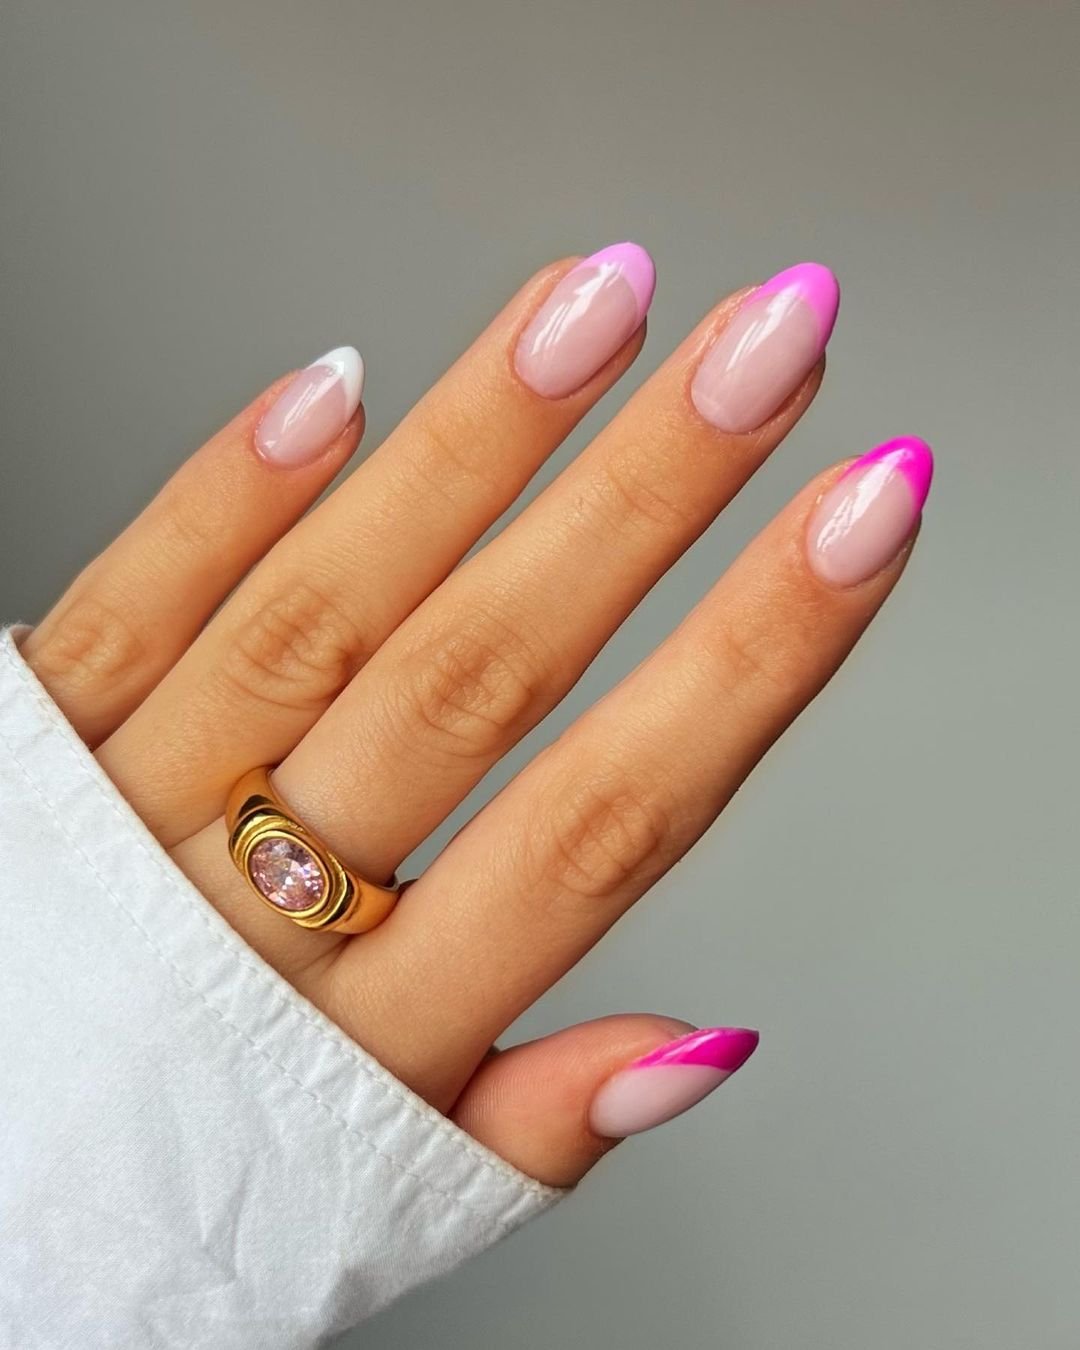 21 - Picture of Pink French Tip Nails